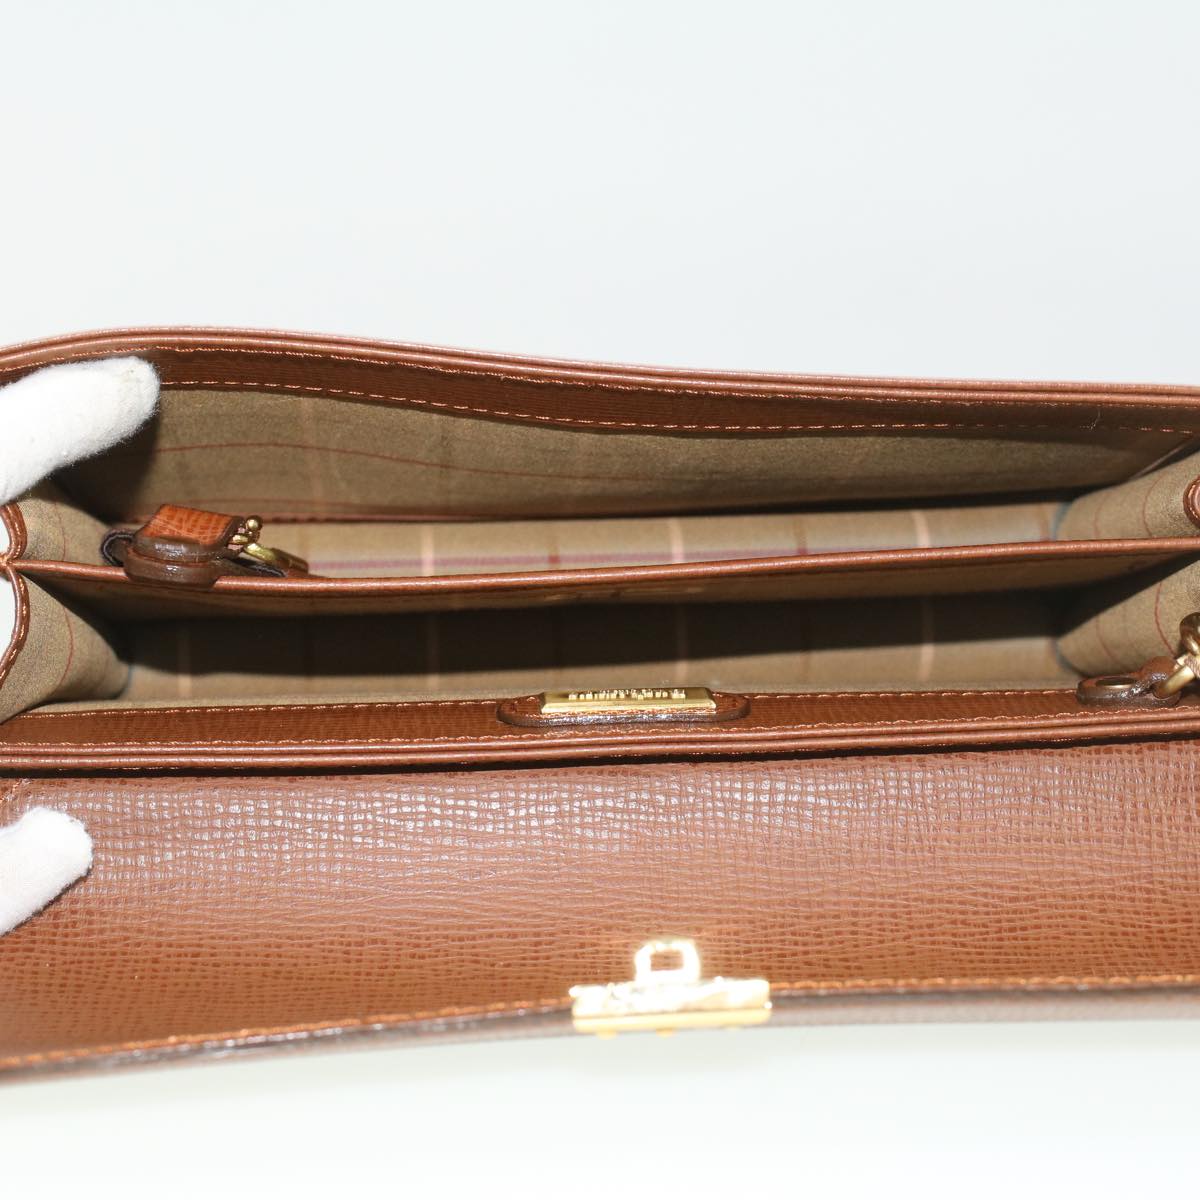 Burberrys Clutch Bag Leather Brown Auth am3369